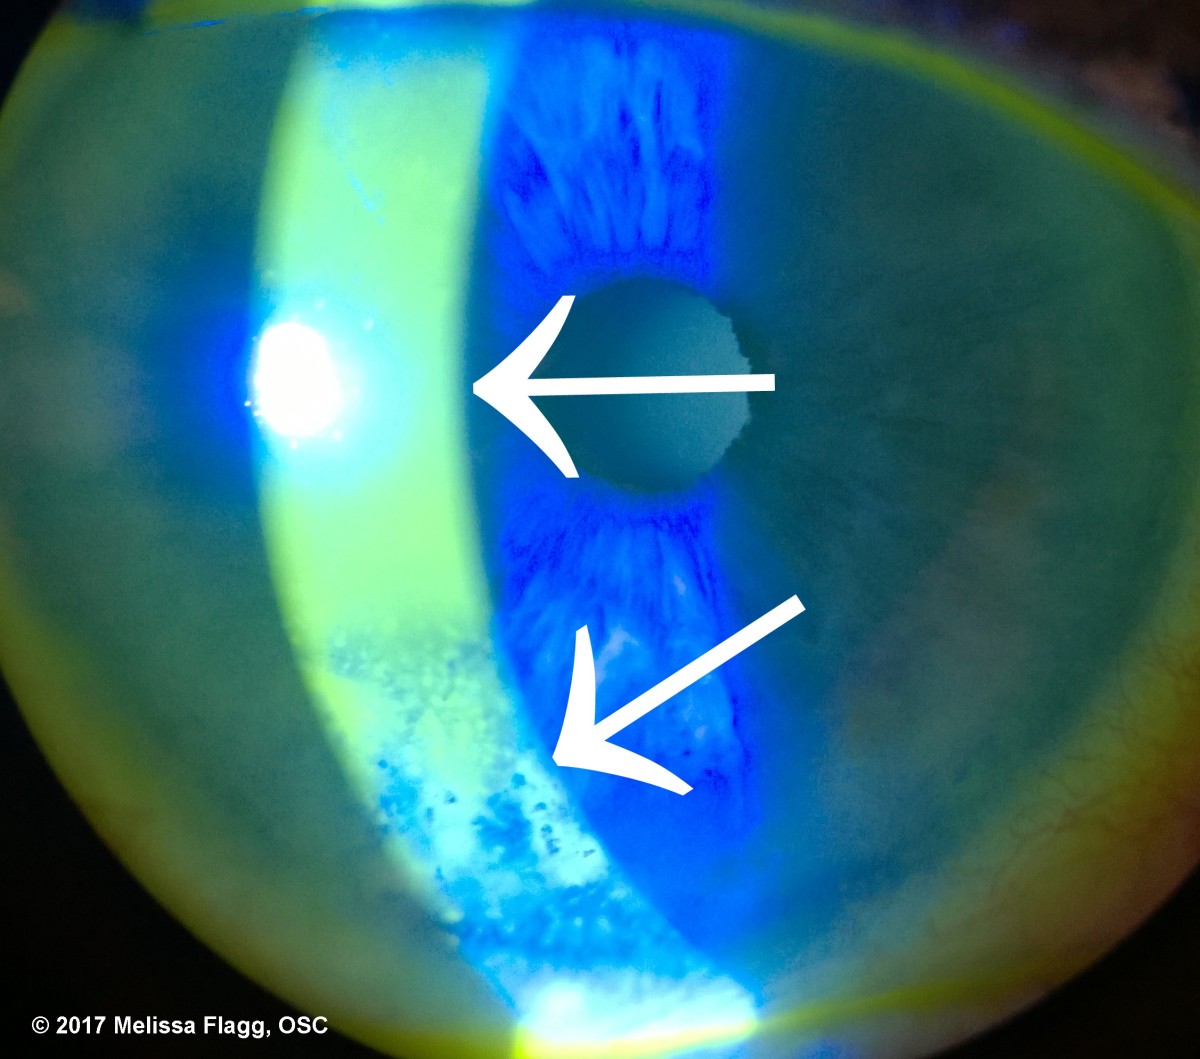 This image shows an eye stained with fluorescein. The top arrows point to what the tear film should look like when stained. The bottom arrow points to the disrupted tear film caused by dryness.